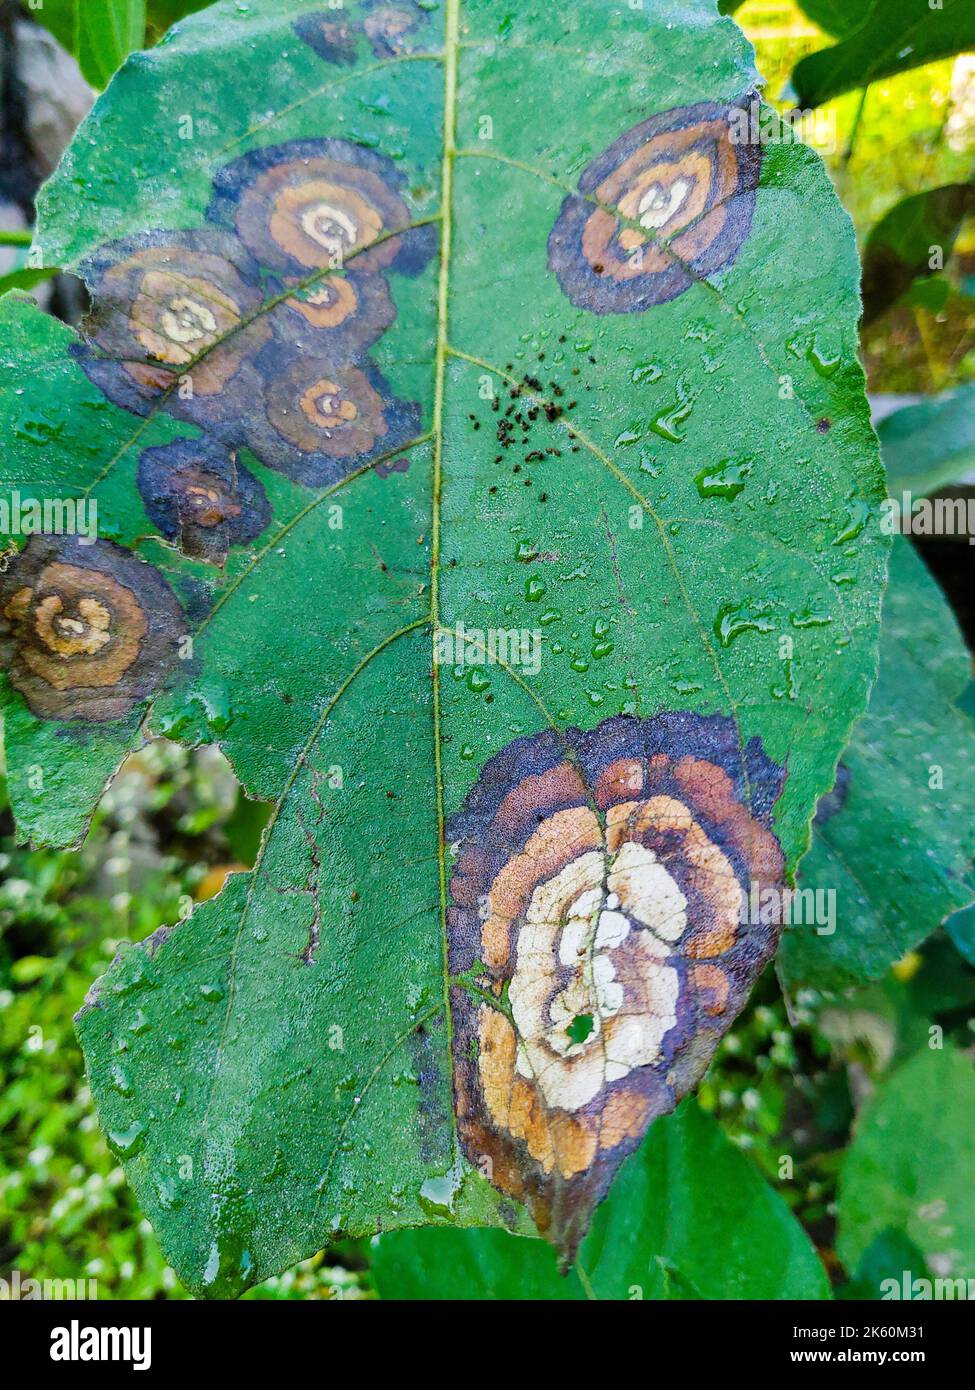 Plant diseases. Leaf spot caused by Colletotrichum species. Typical symptoms, appearing as circular or ovoid, sunken, and brown lesions with a yellow Stock Photo